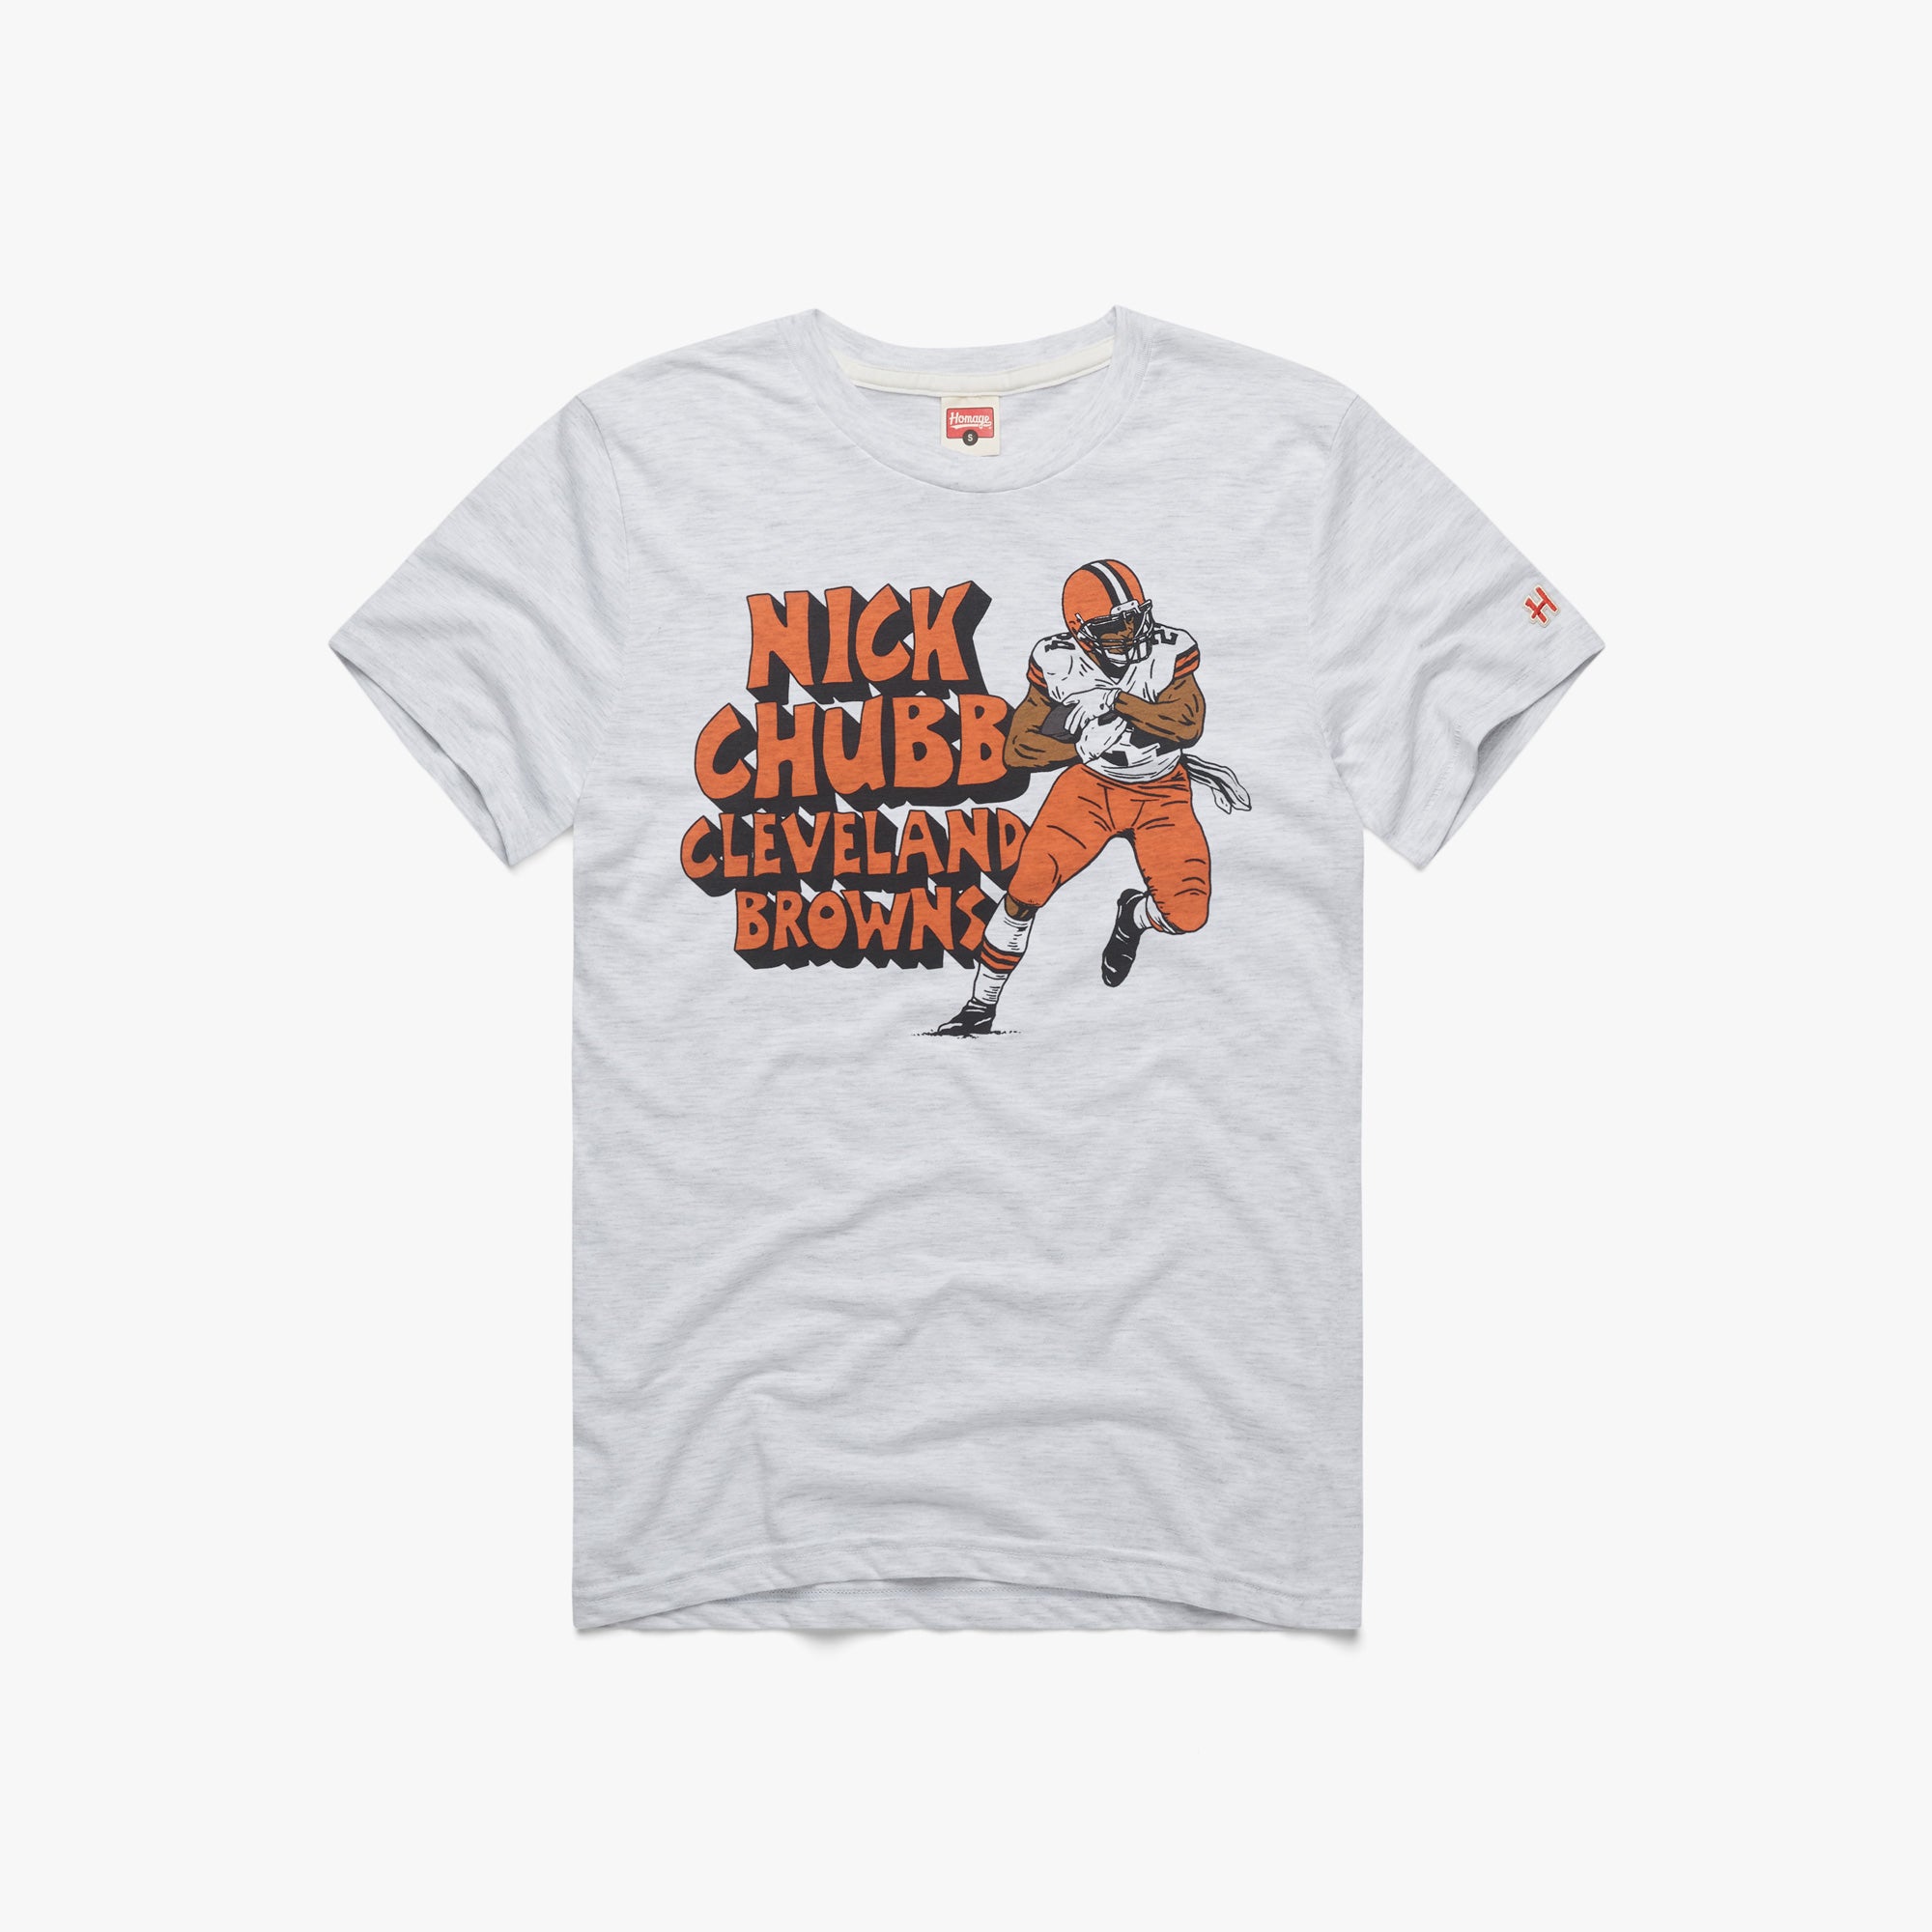 Cleveland Browns Nick Chubb T-Shirt from Homage. | Officially Licensed Vintage NFL Apparel from Homage Pro Shop.